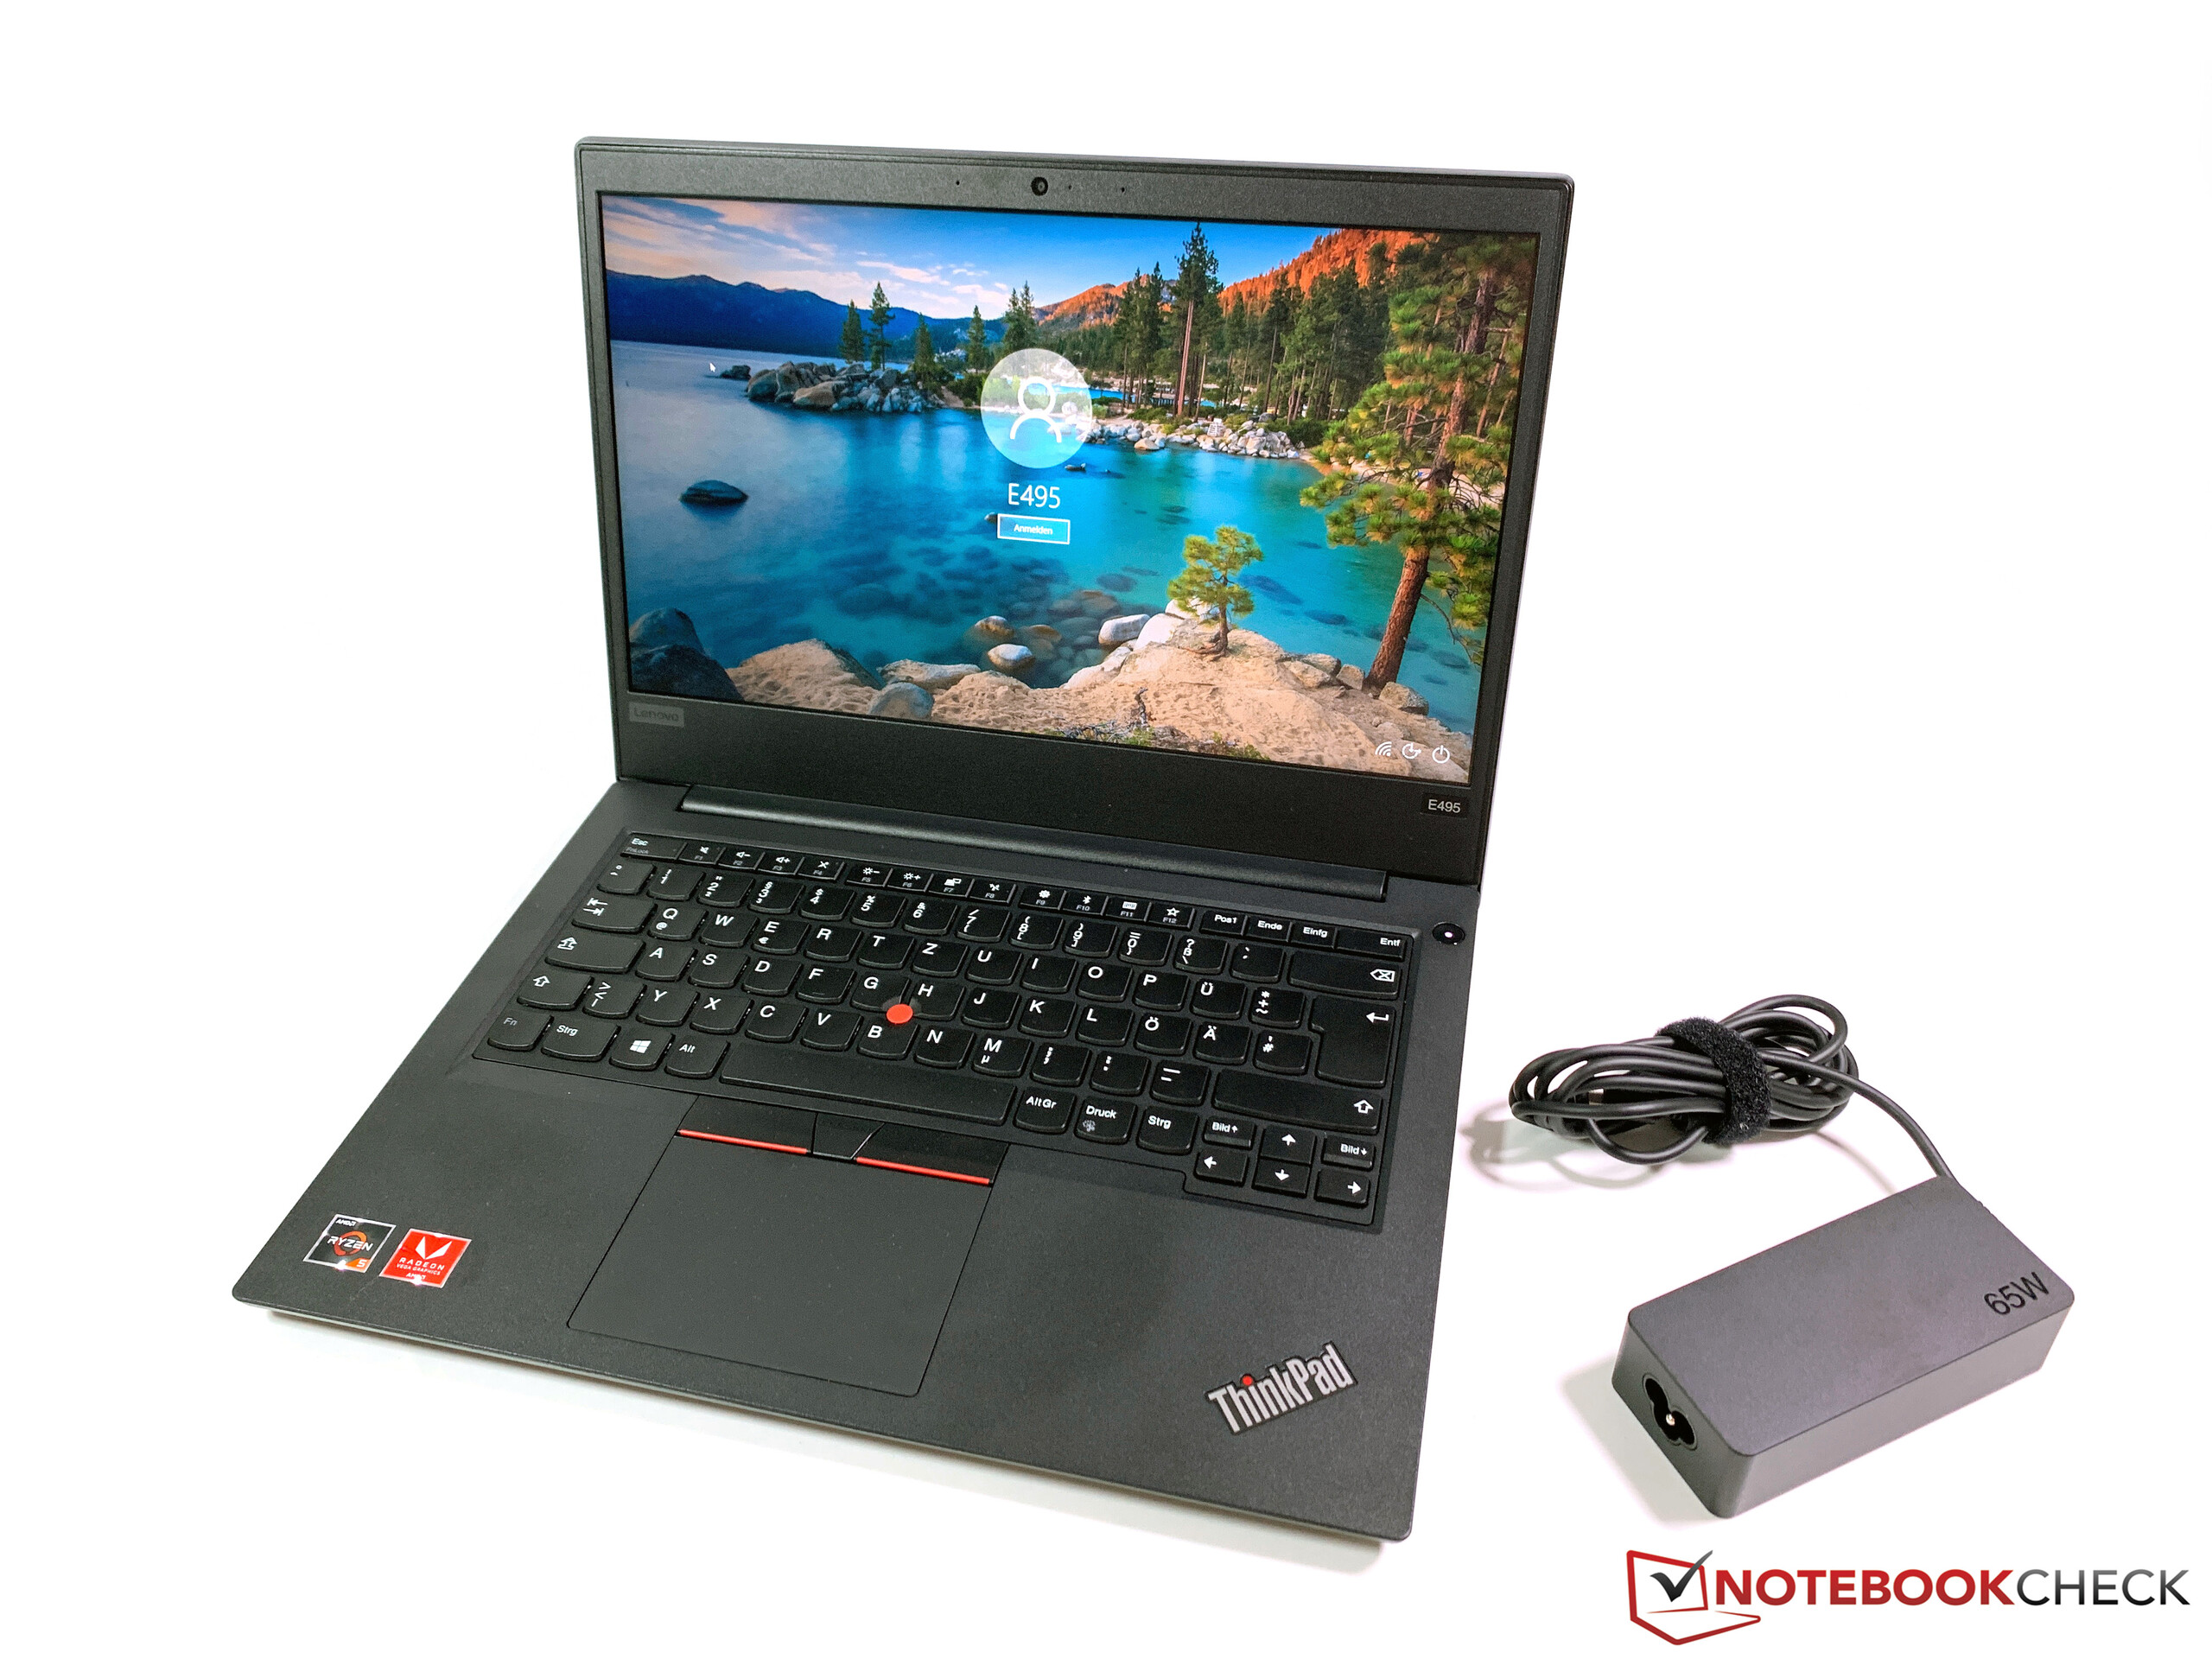 Lenovo ThinkPad E495 Laptop Review: Inexpensive office device with